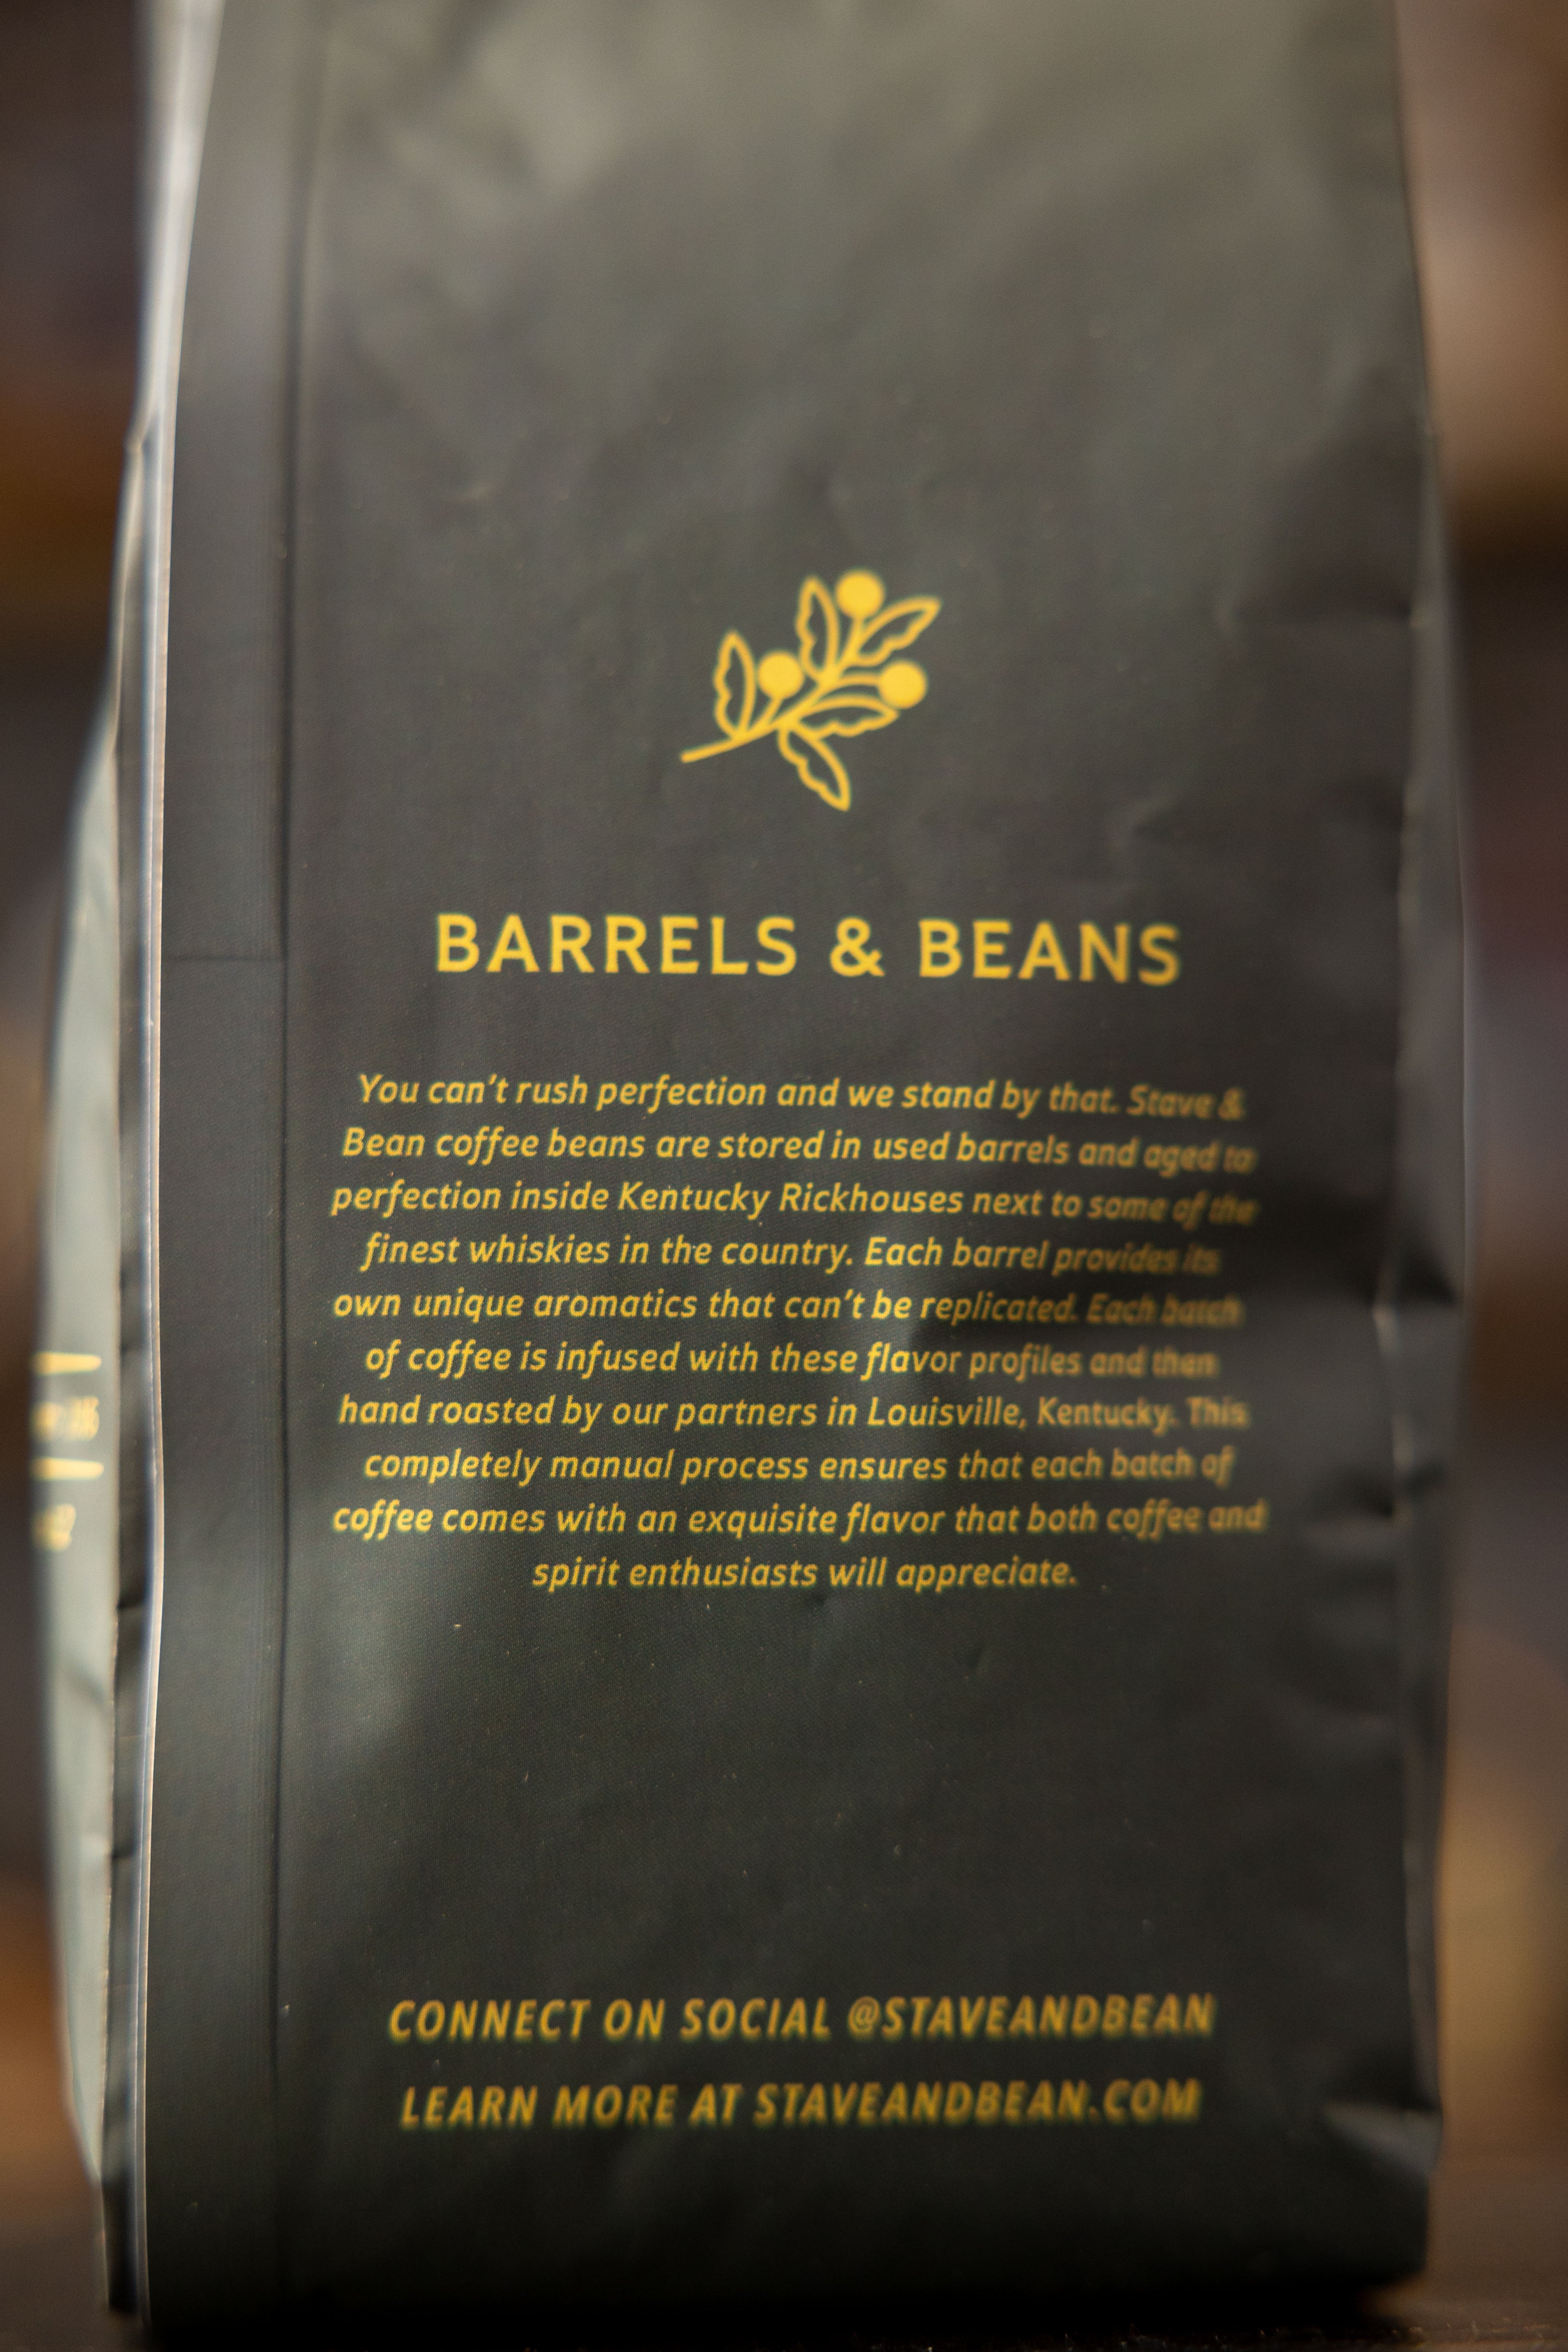 Barrel Aged Coffee - Exclusive Collaboration with Stave & Bean